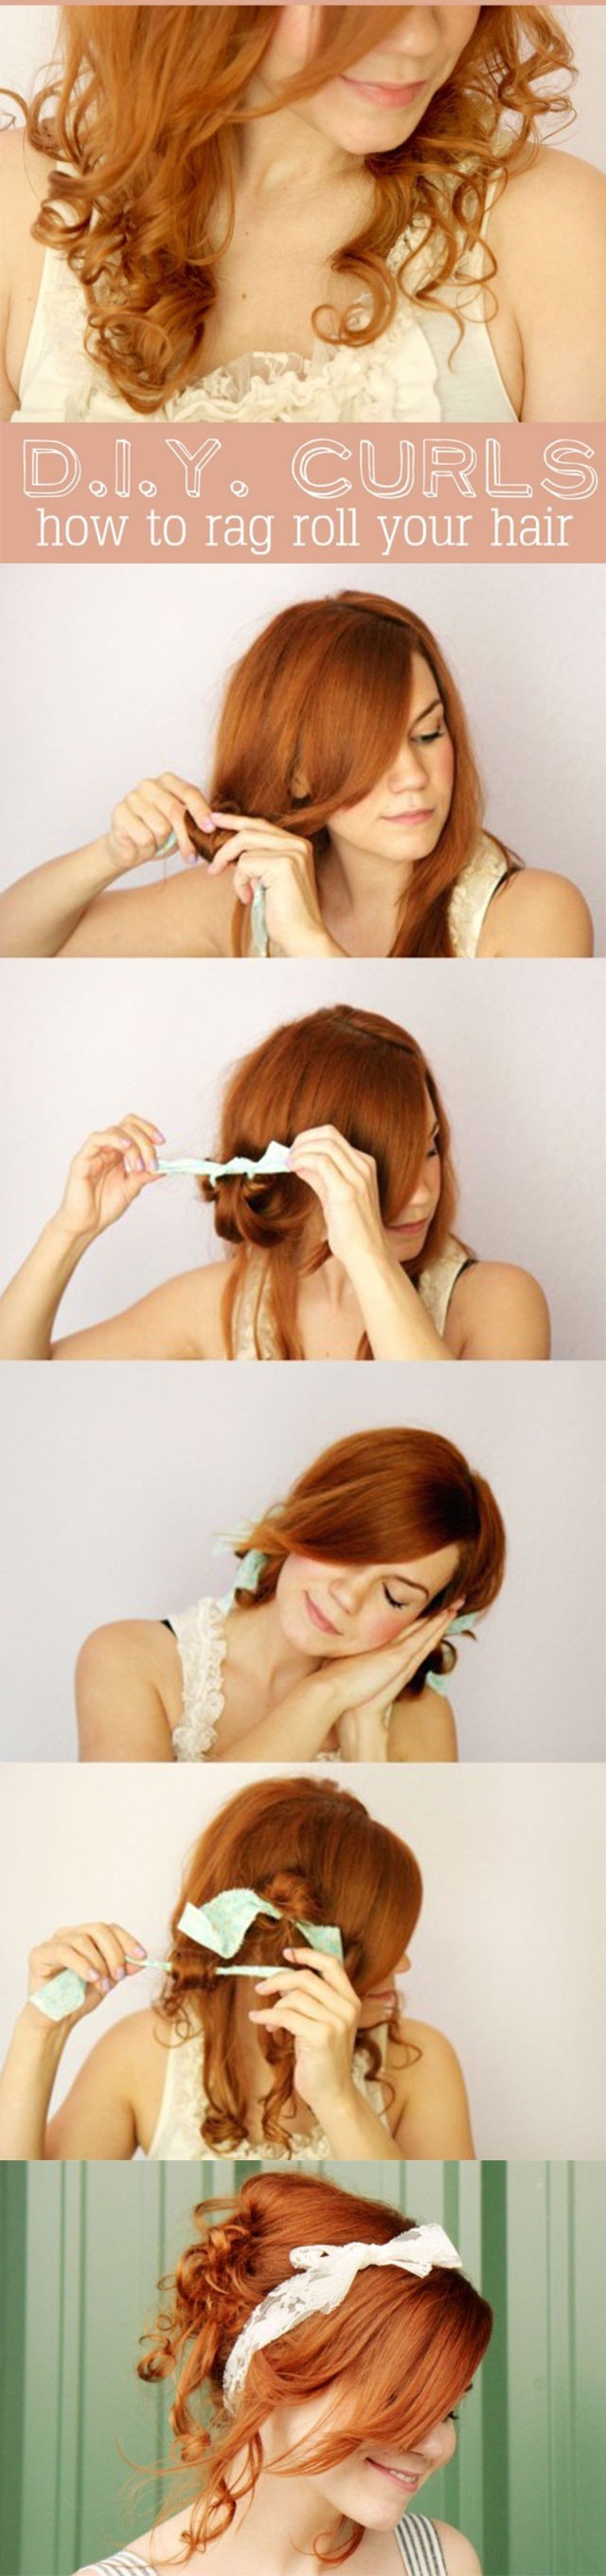 DIY Curls: How to Rag Roll your Hair